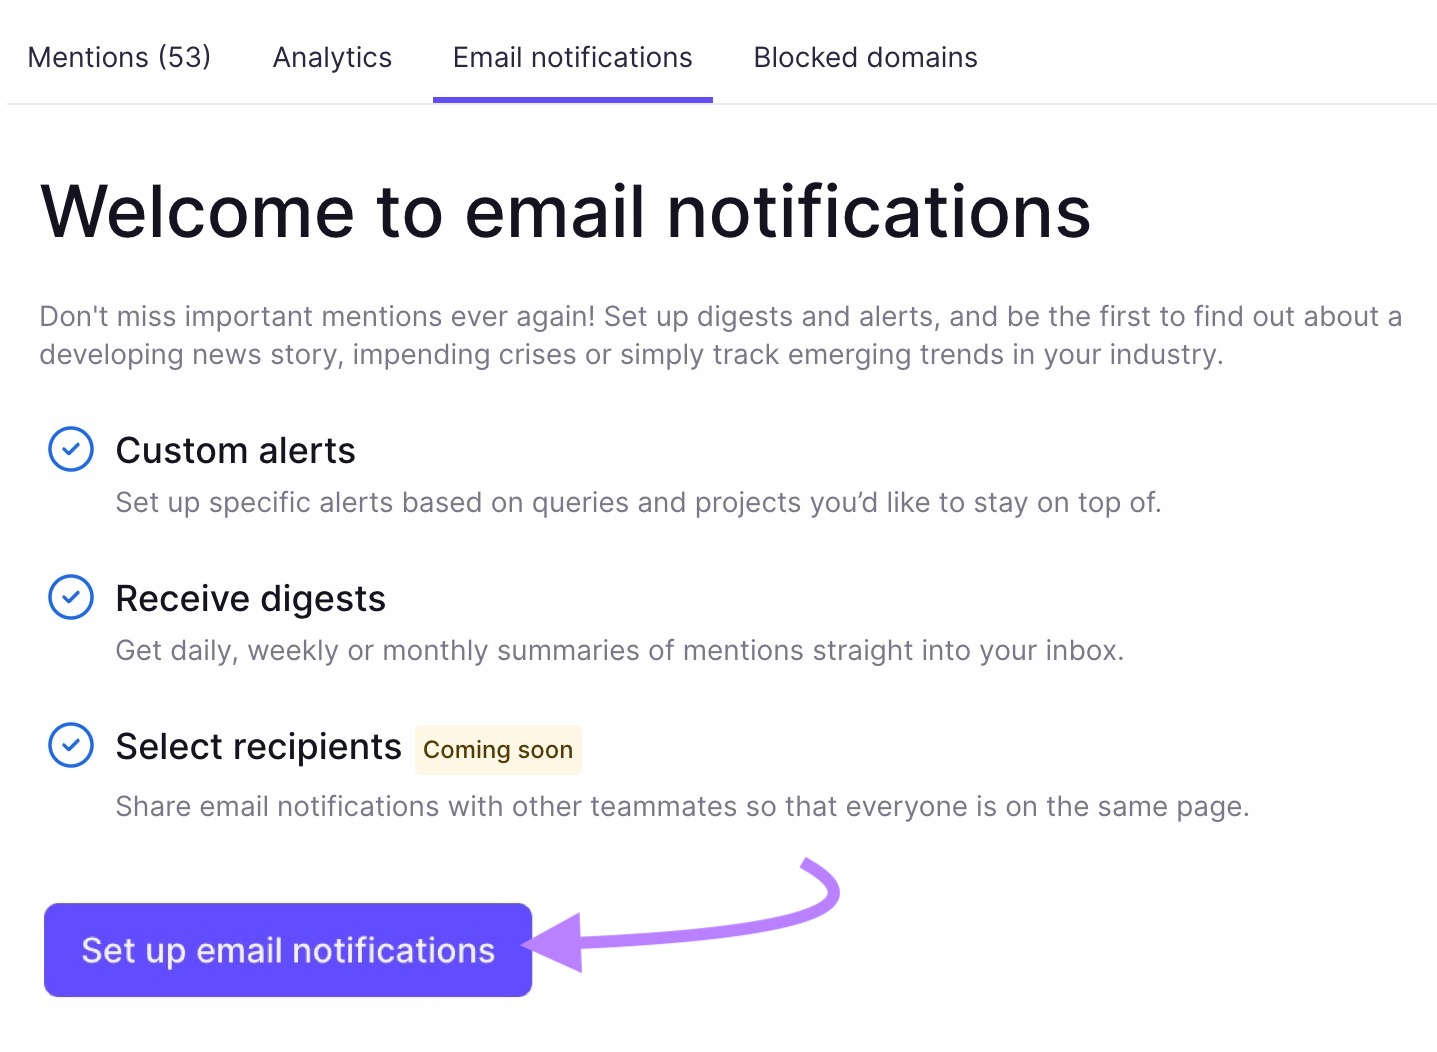 "Welcome to email notifications" pop up window